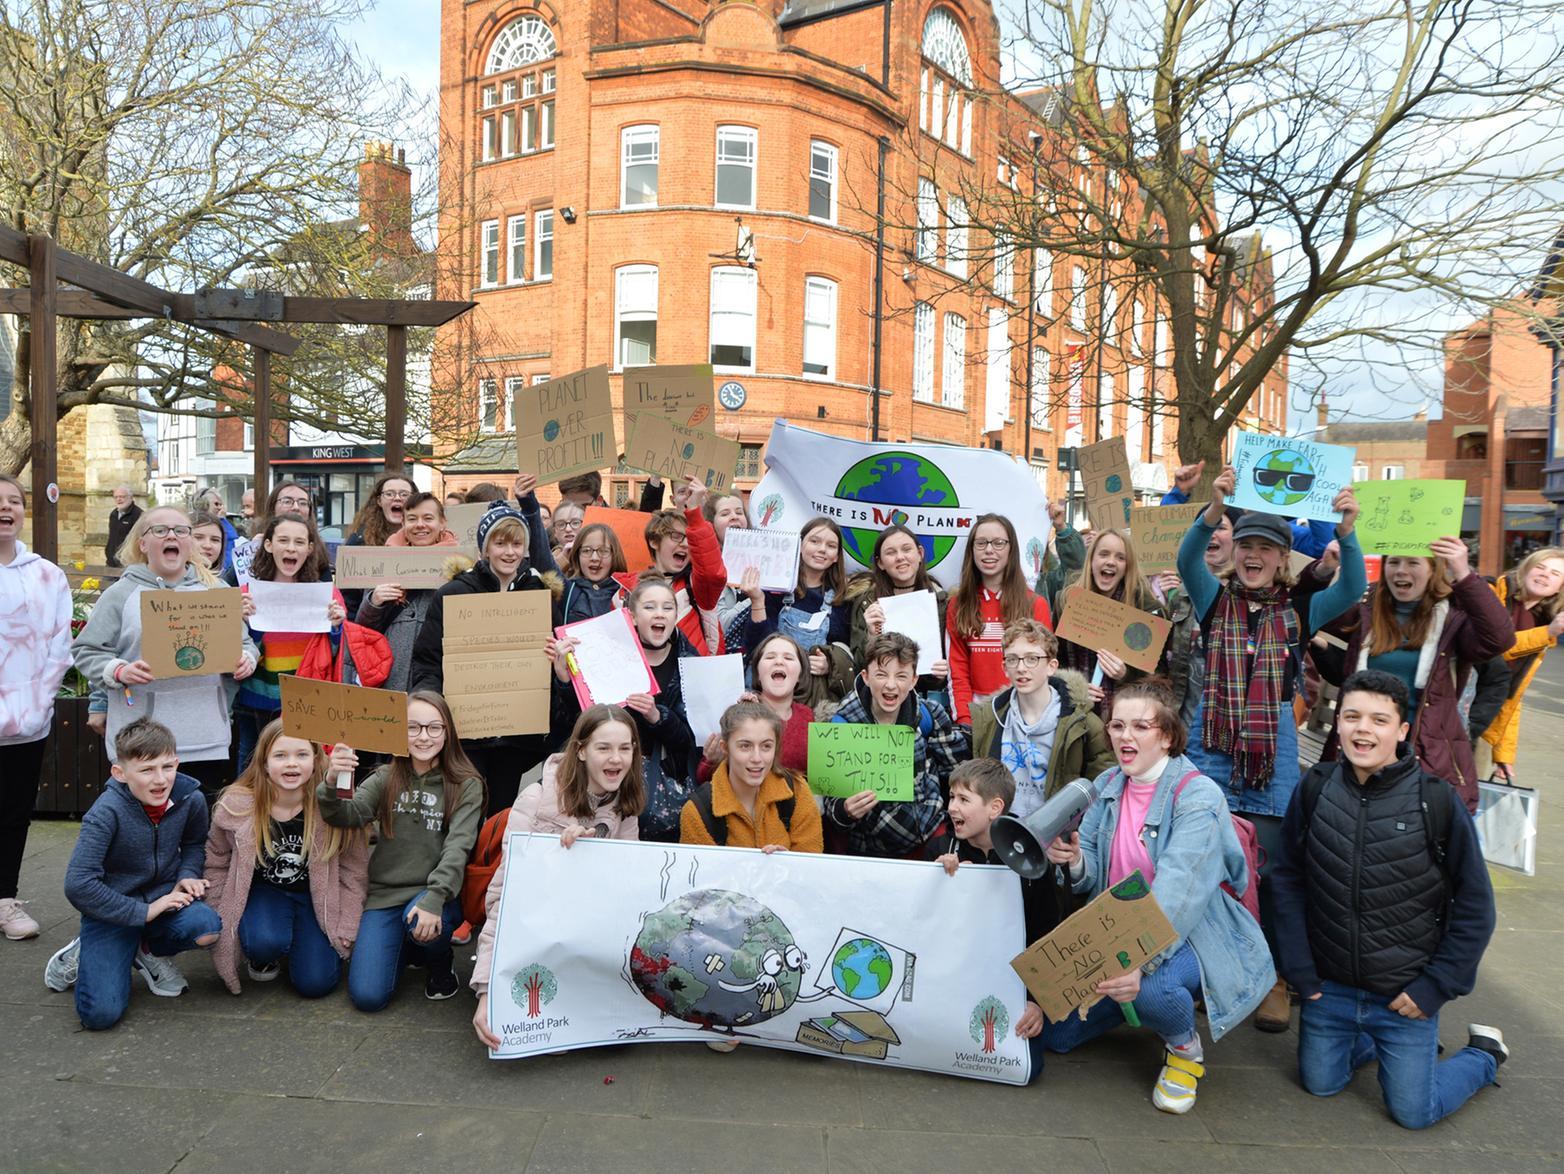 Students from two Market Harborough schools headed into the town centre after lessons to protest for more action to combat climate change.
The students from Welland Park College and Robert Smyth Academy chose not to walk out of lessons, but instead after school ended they headed into the town centre carrying banners. The protest was part of a global day of action by young people calling for more action from governments to tackle climate change. The protesters headed to Harborough District Councils offices where they met with council leader Neil Bannister, leader of the Lib Dem opposition Cllr Phil Knowles, and Neil OBrien MP.